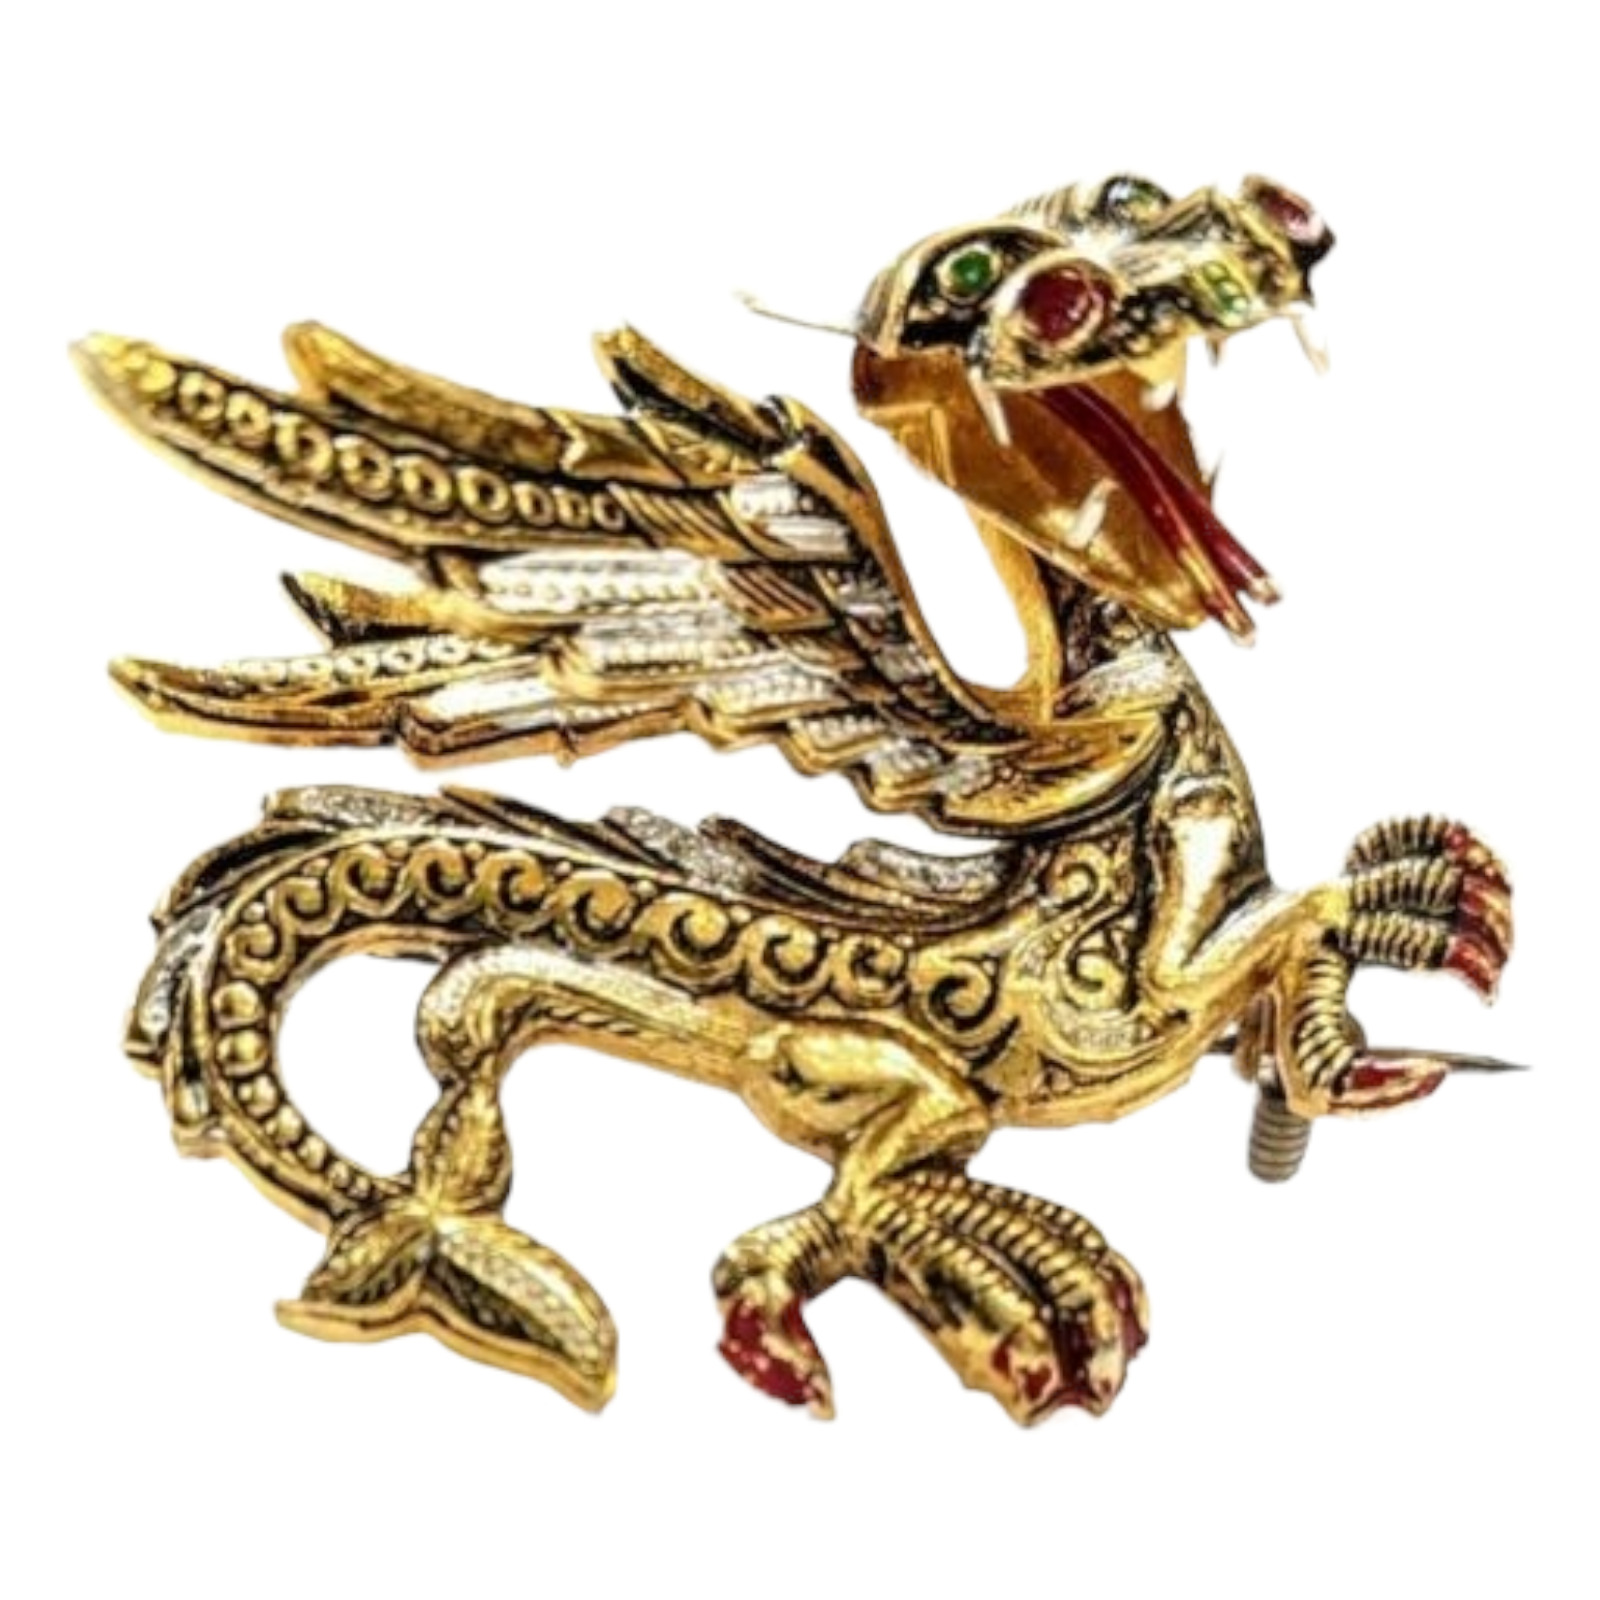 Dragon Brooch Pin Copper Ornate 2-Dimensional Spain Handcrafted Vintage Large